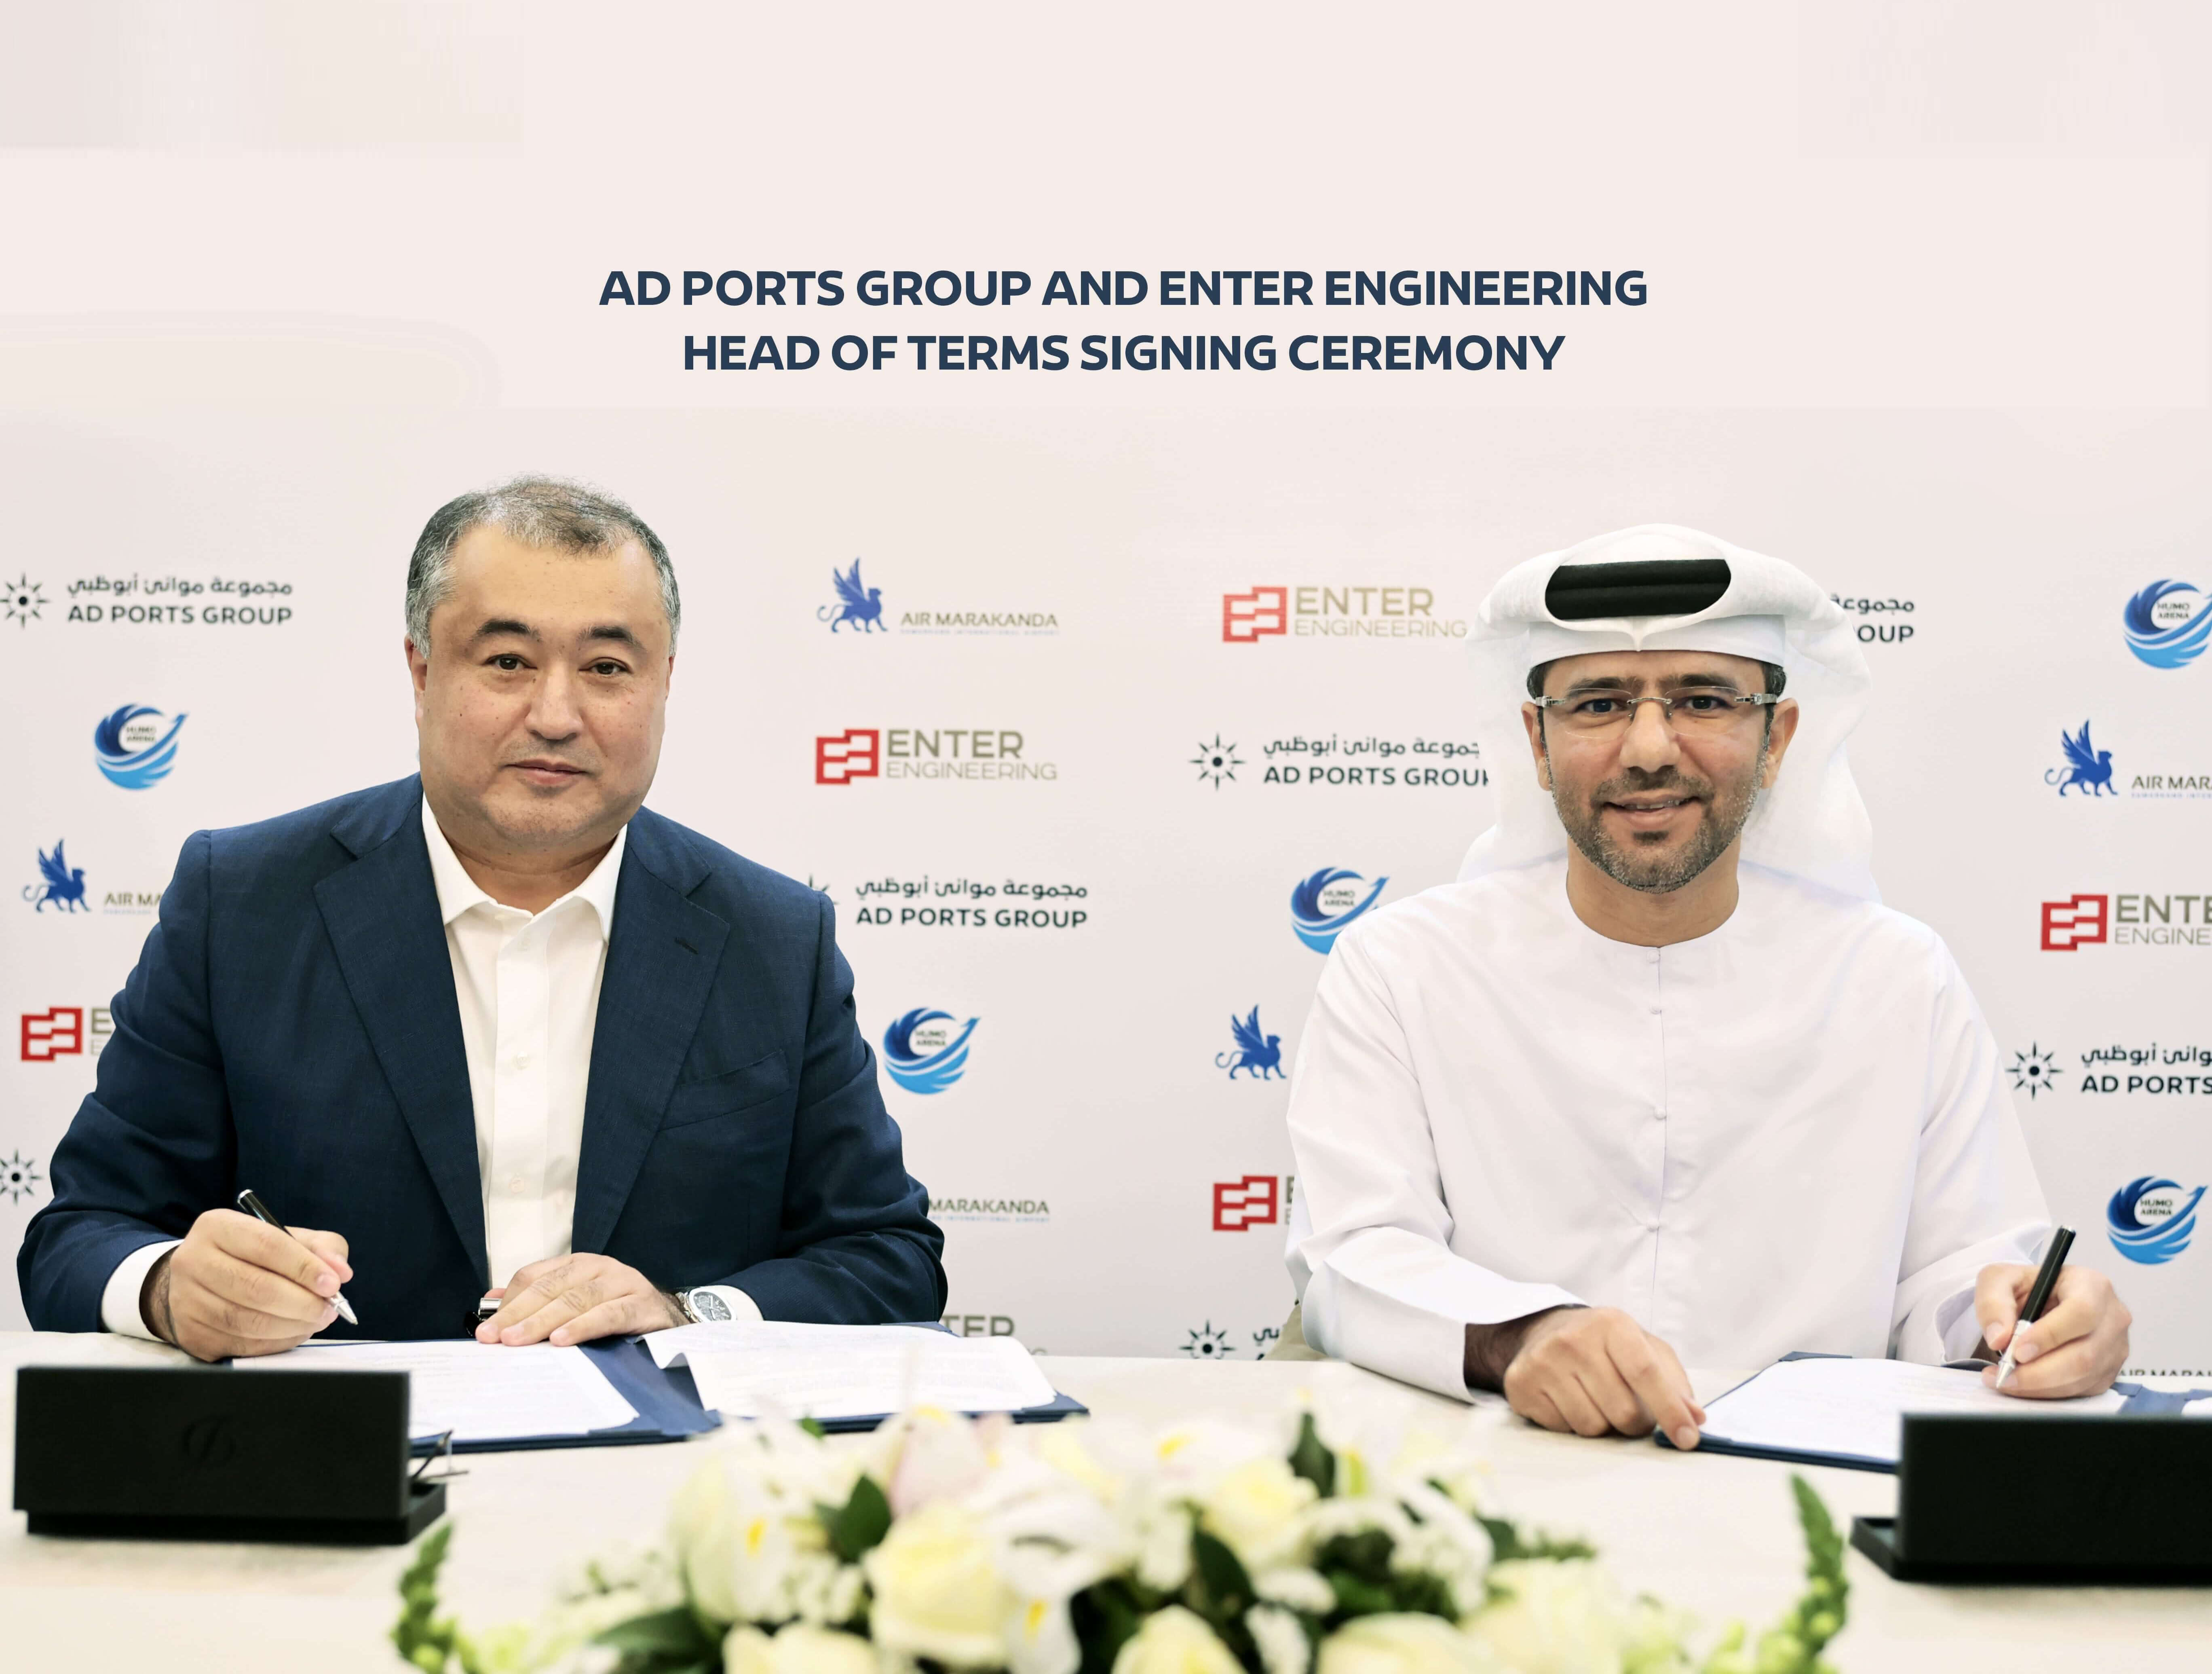 AD Ports Group Signs Head of Terms Agreement with Enter Engineering Group of Uzbekistan